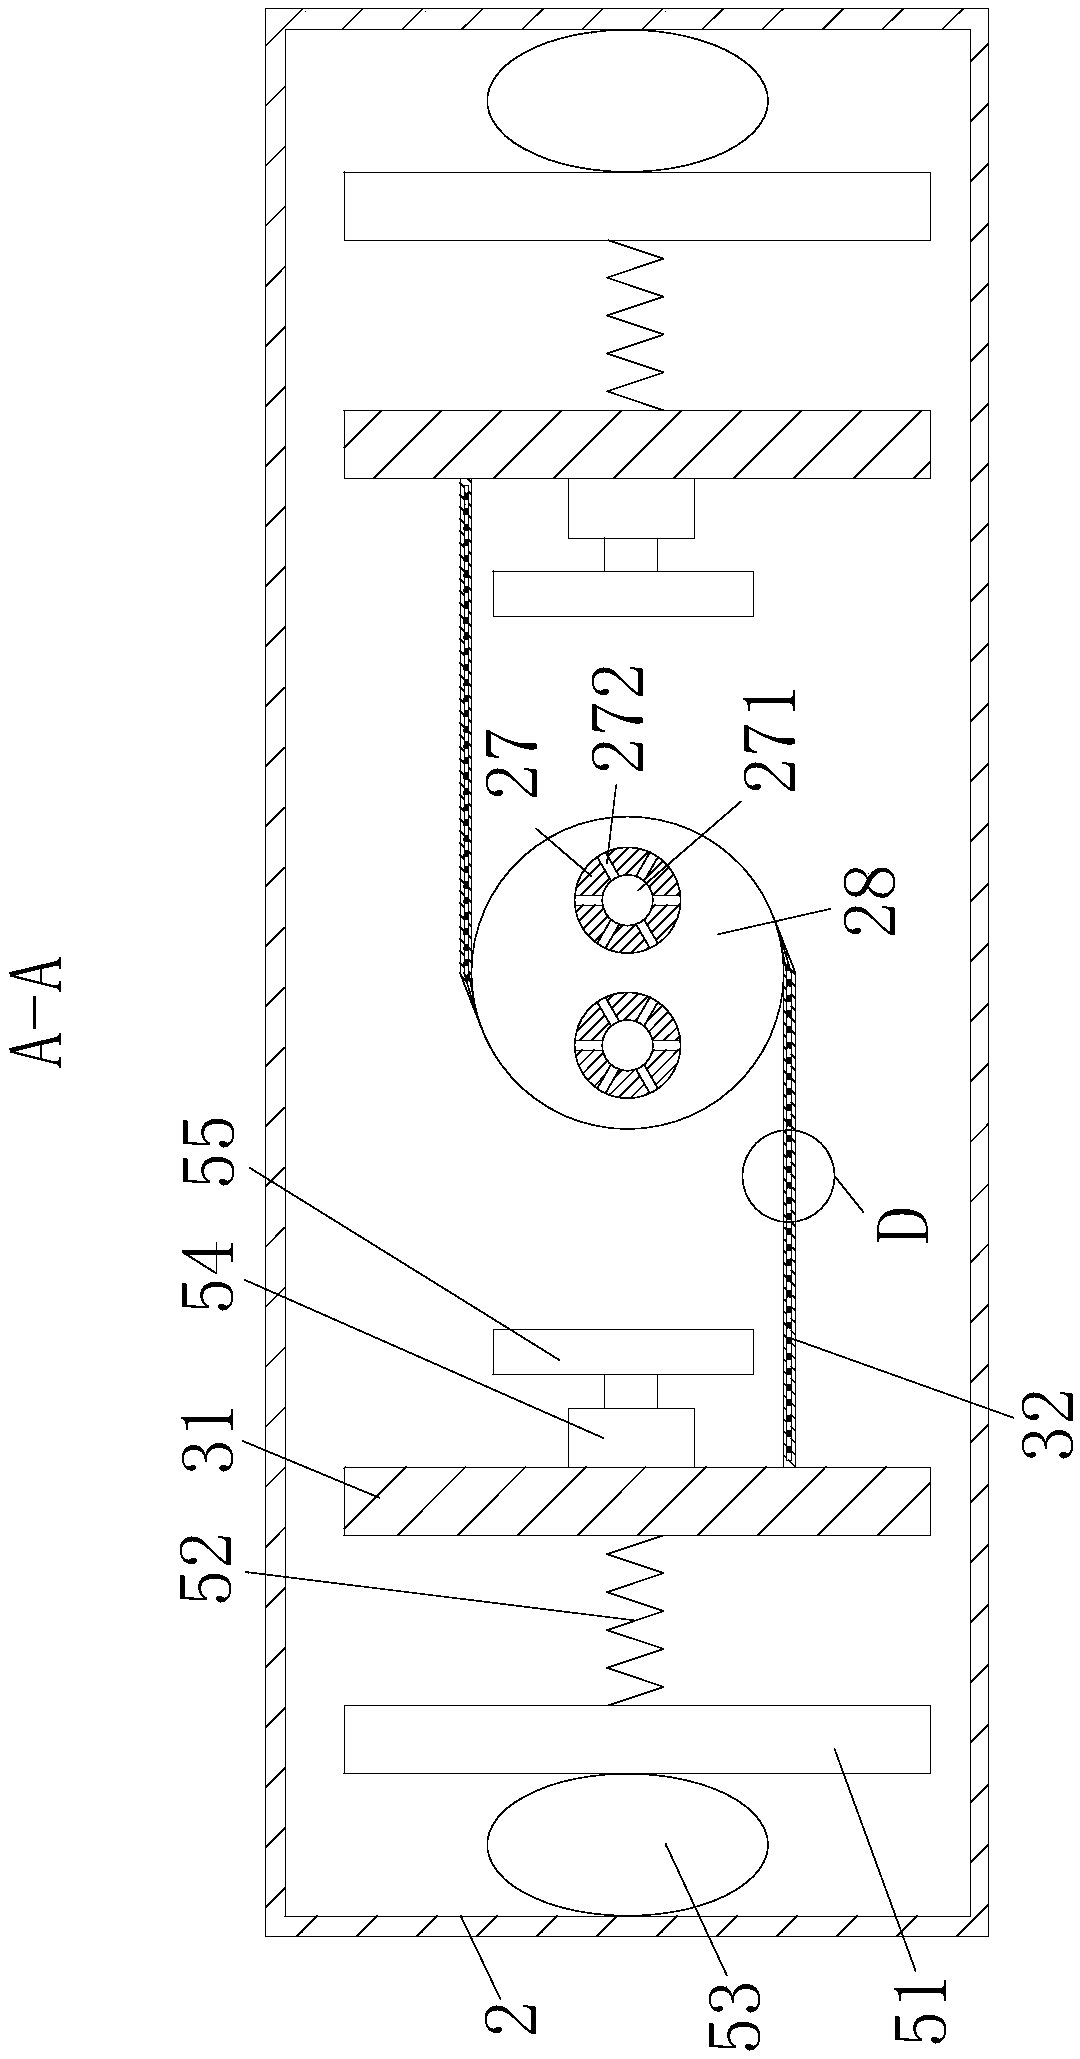 Mixing process production device for construction